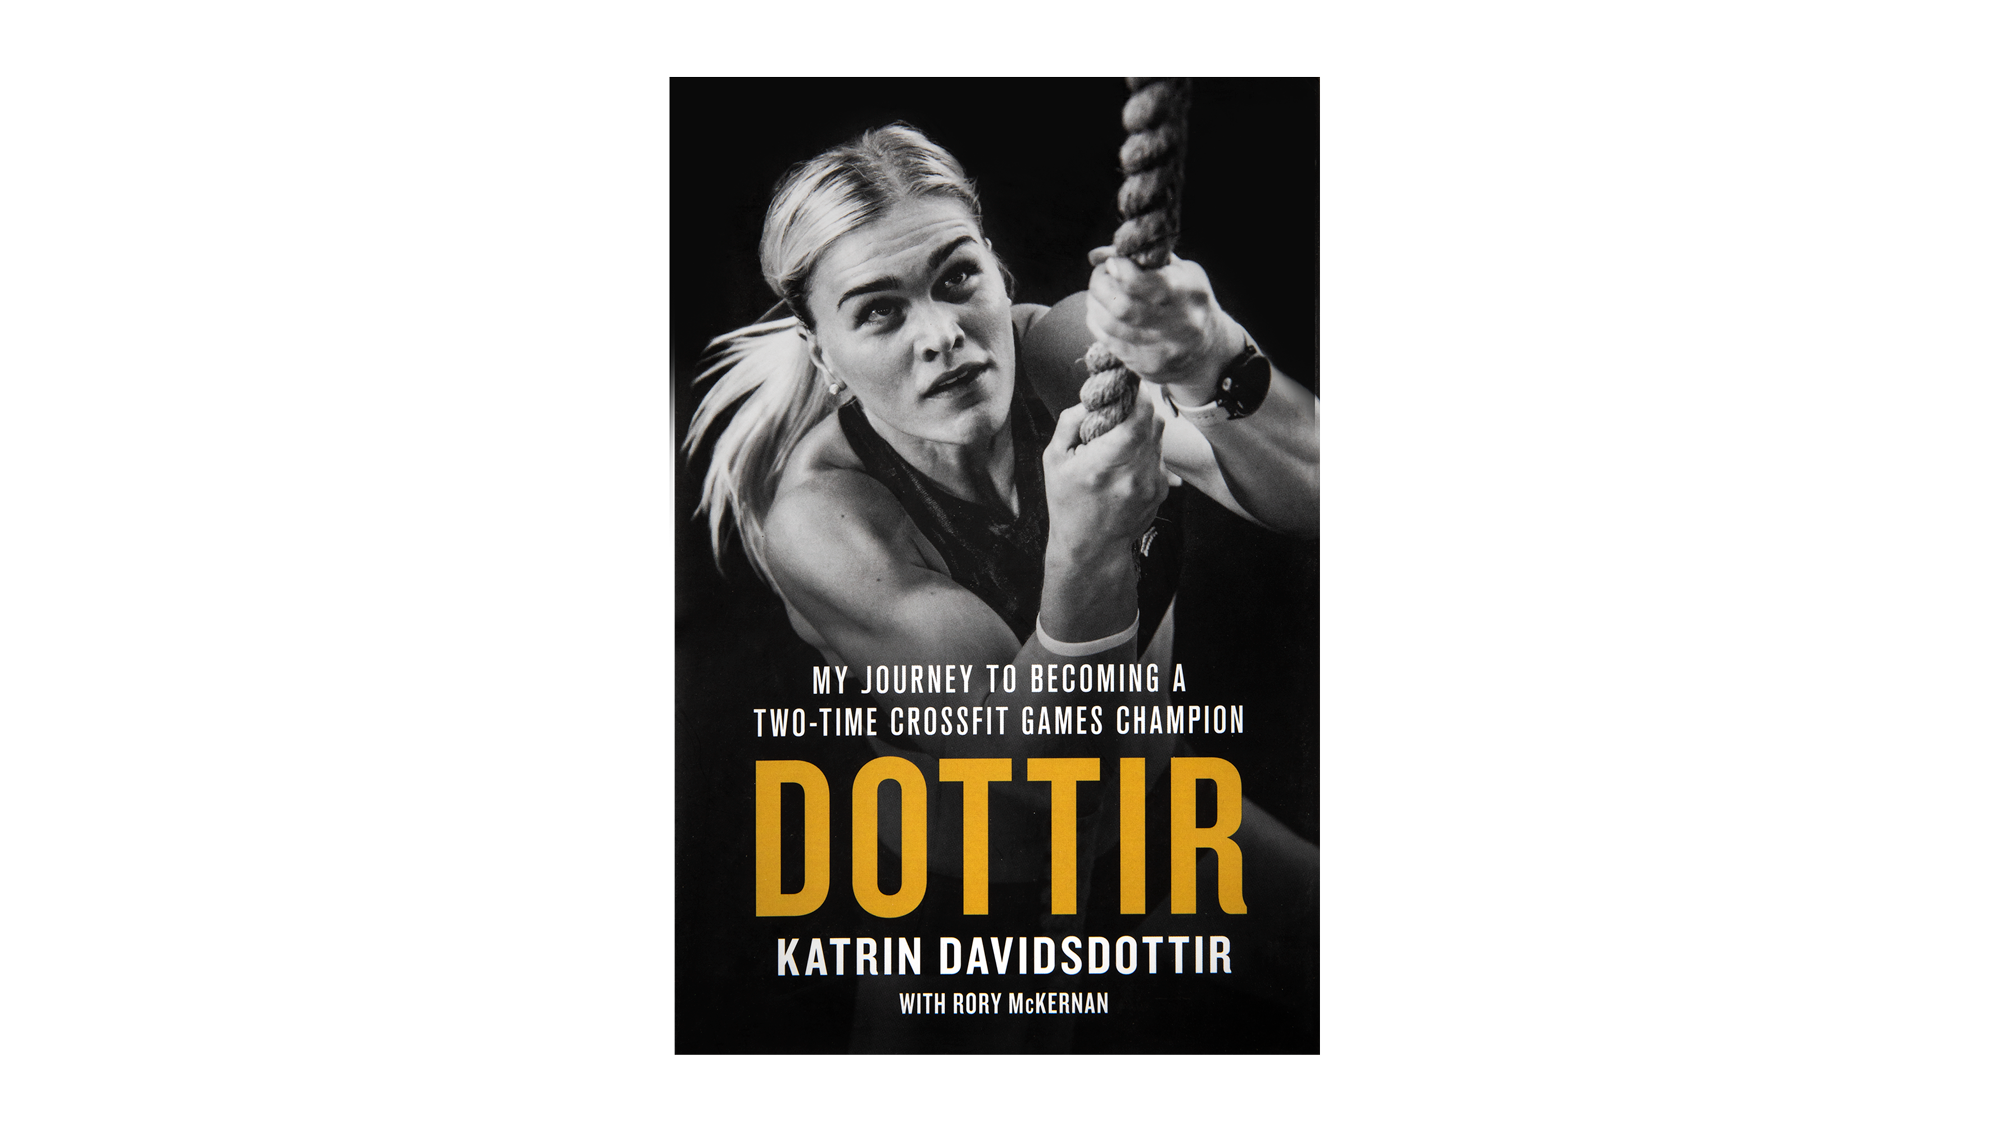 DOTTIR: My Journey to becoming a Two-Time CrossFit Games Champion